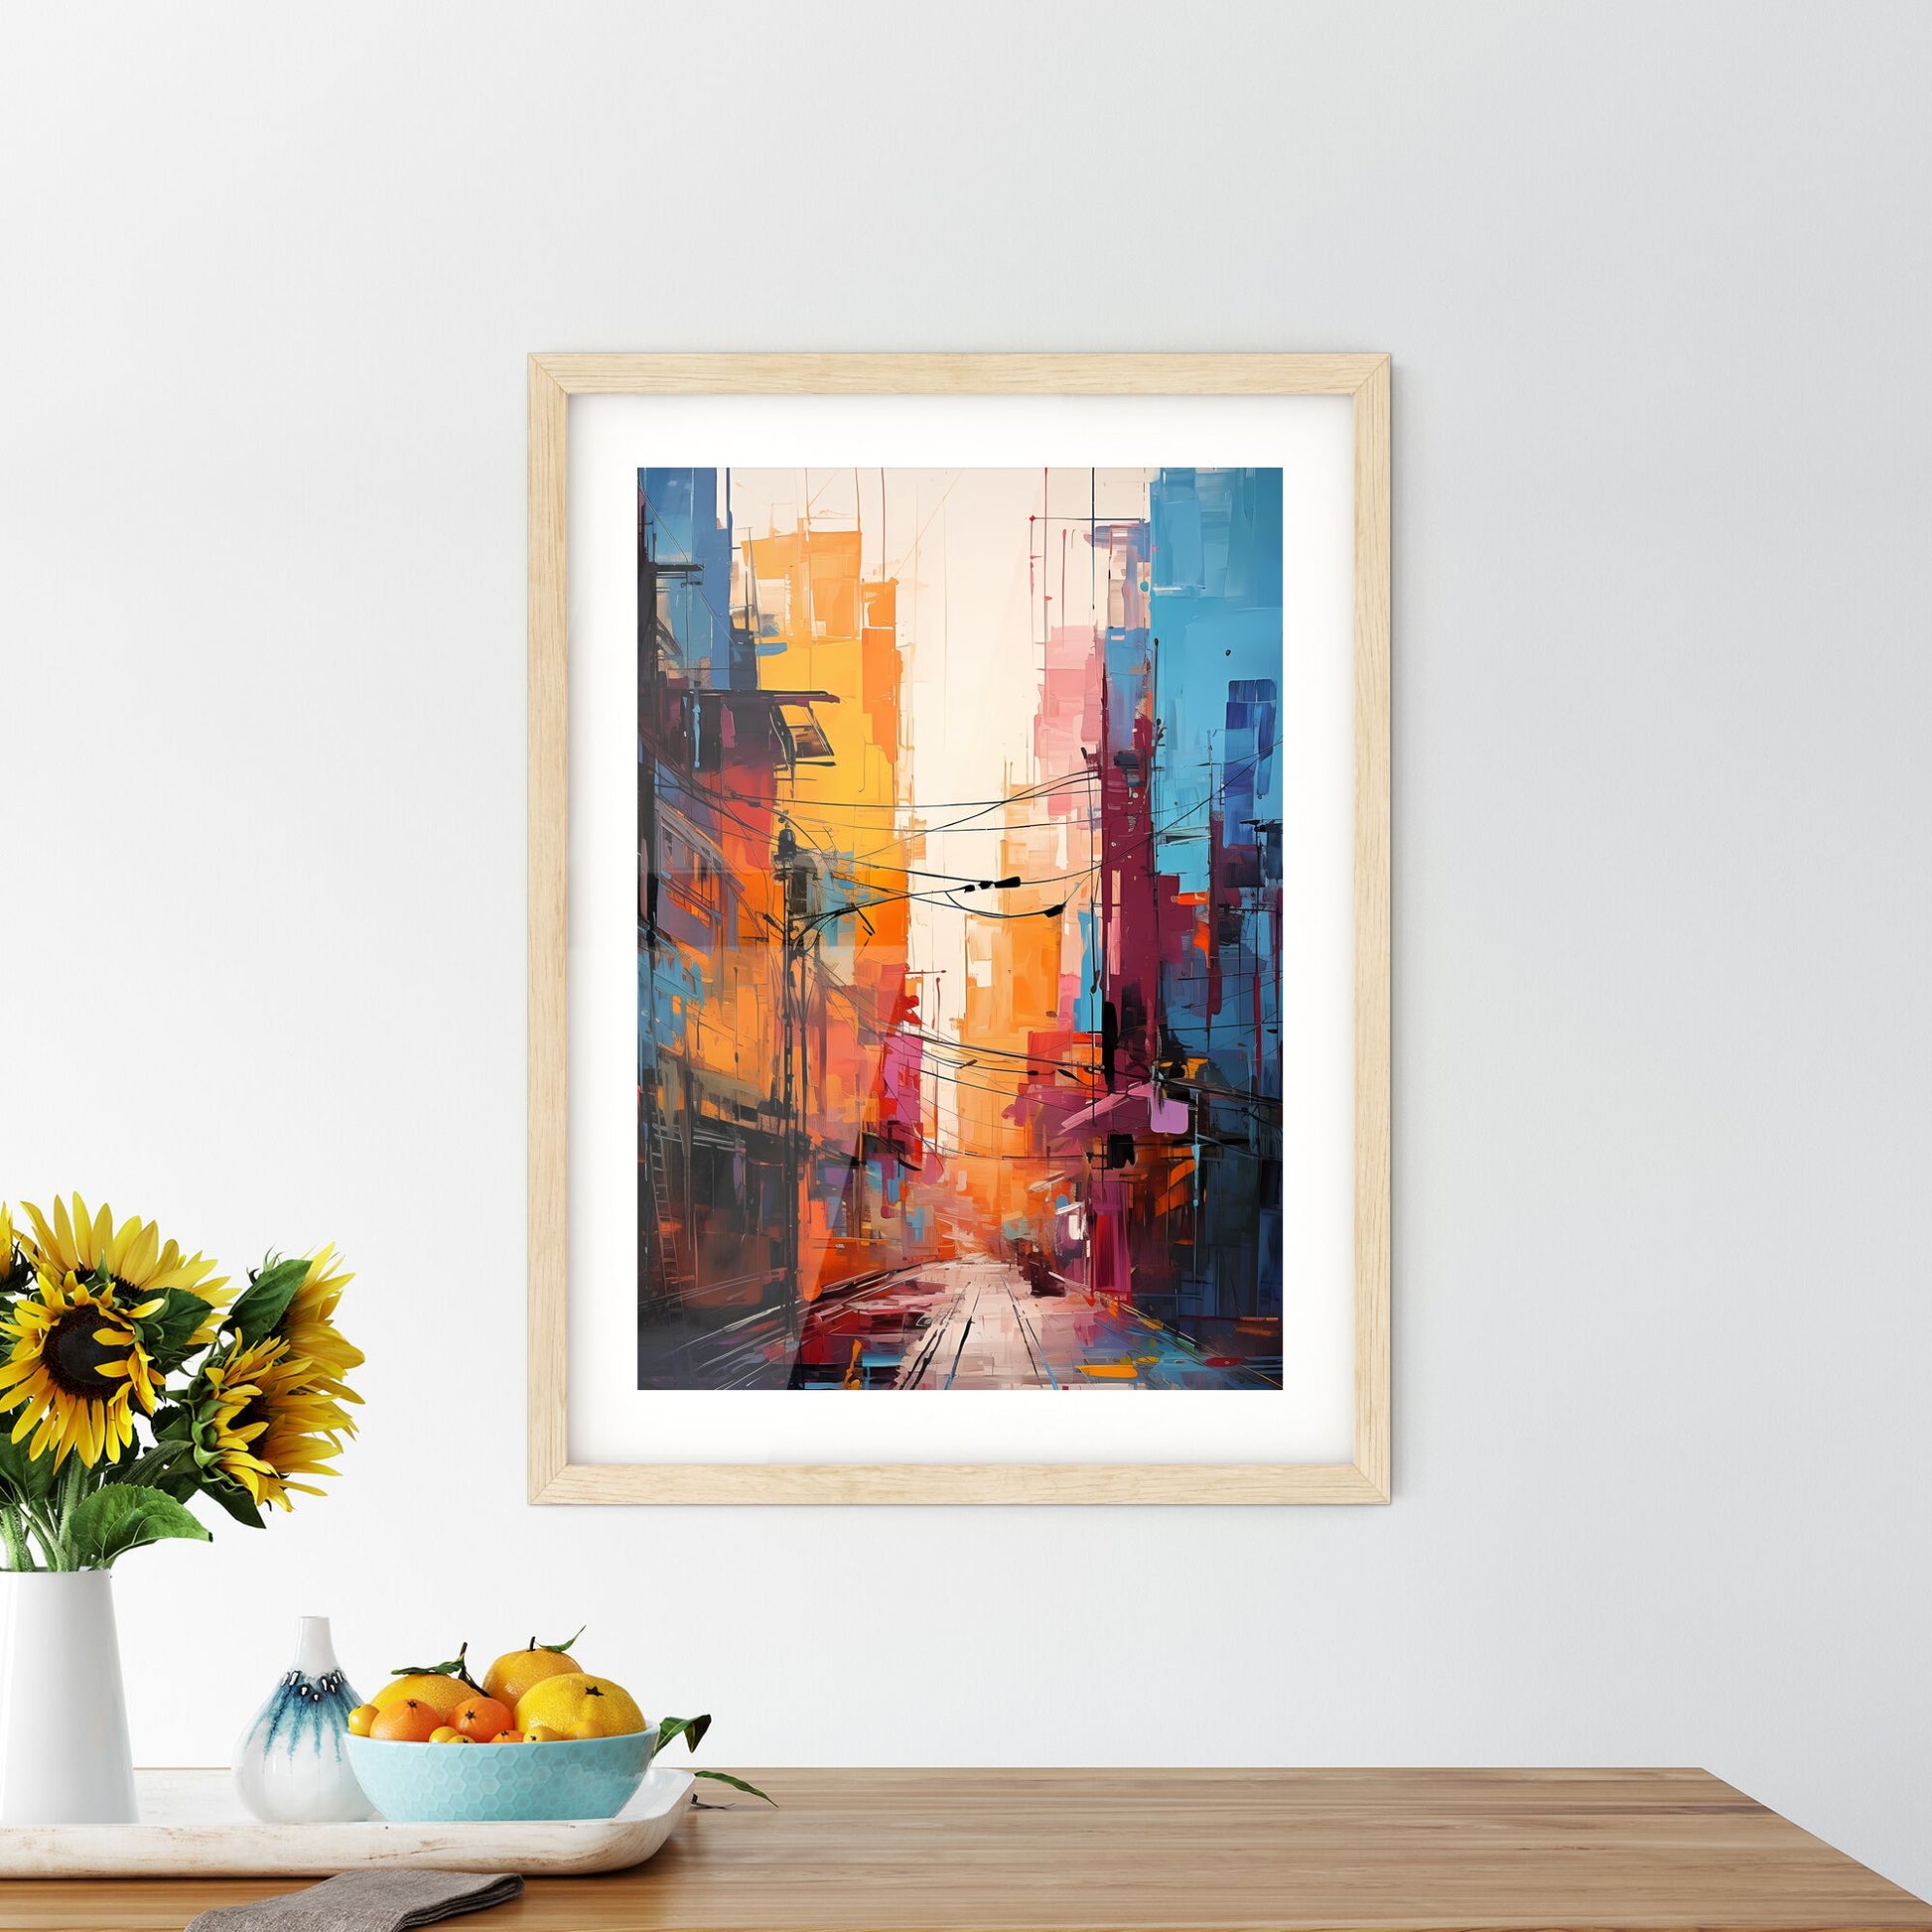 Abstract Art Of Cityscapeillustration Painting - A Painting Of A Street With Buildings And Power Lines Default Title